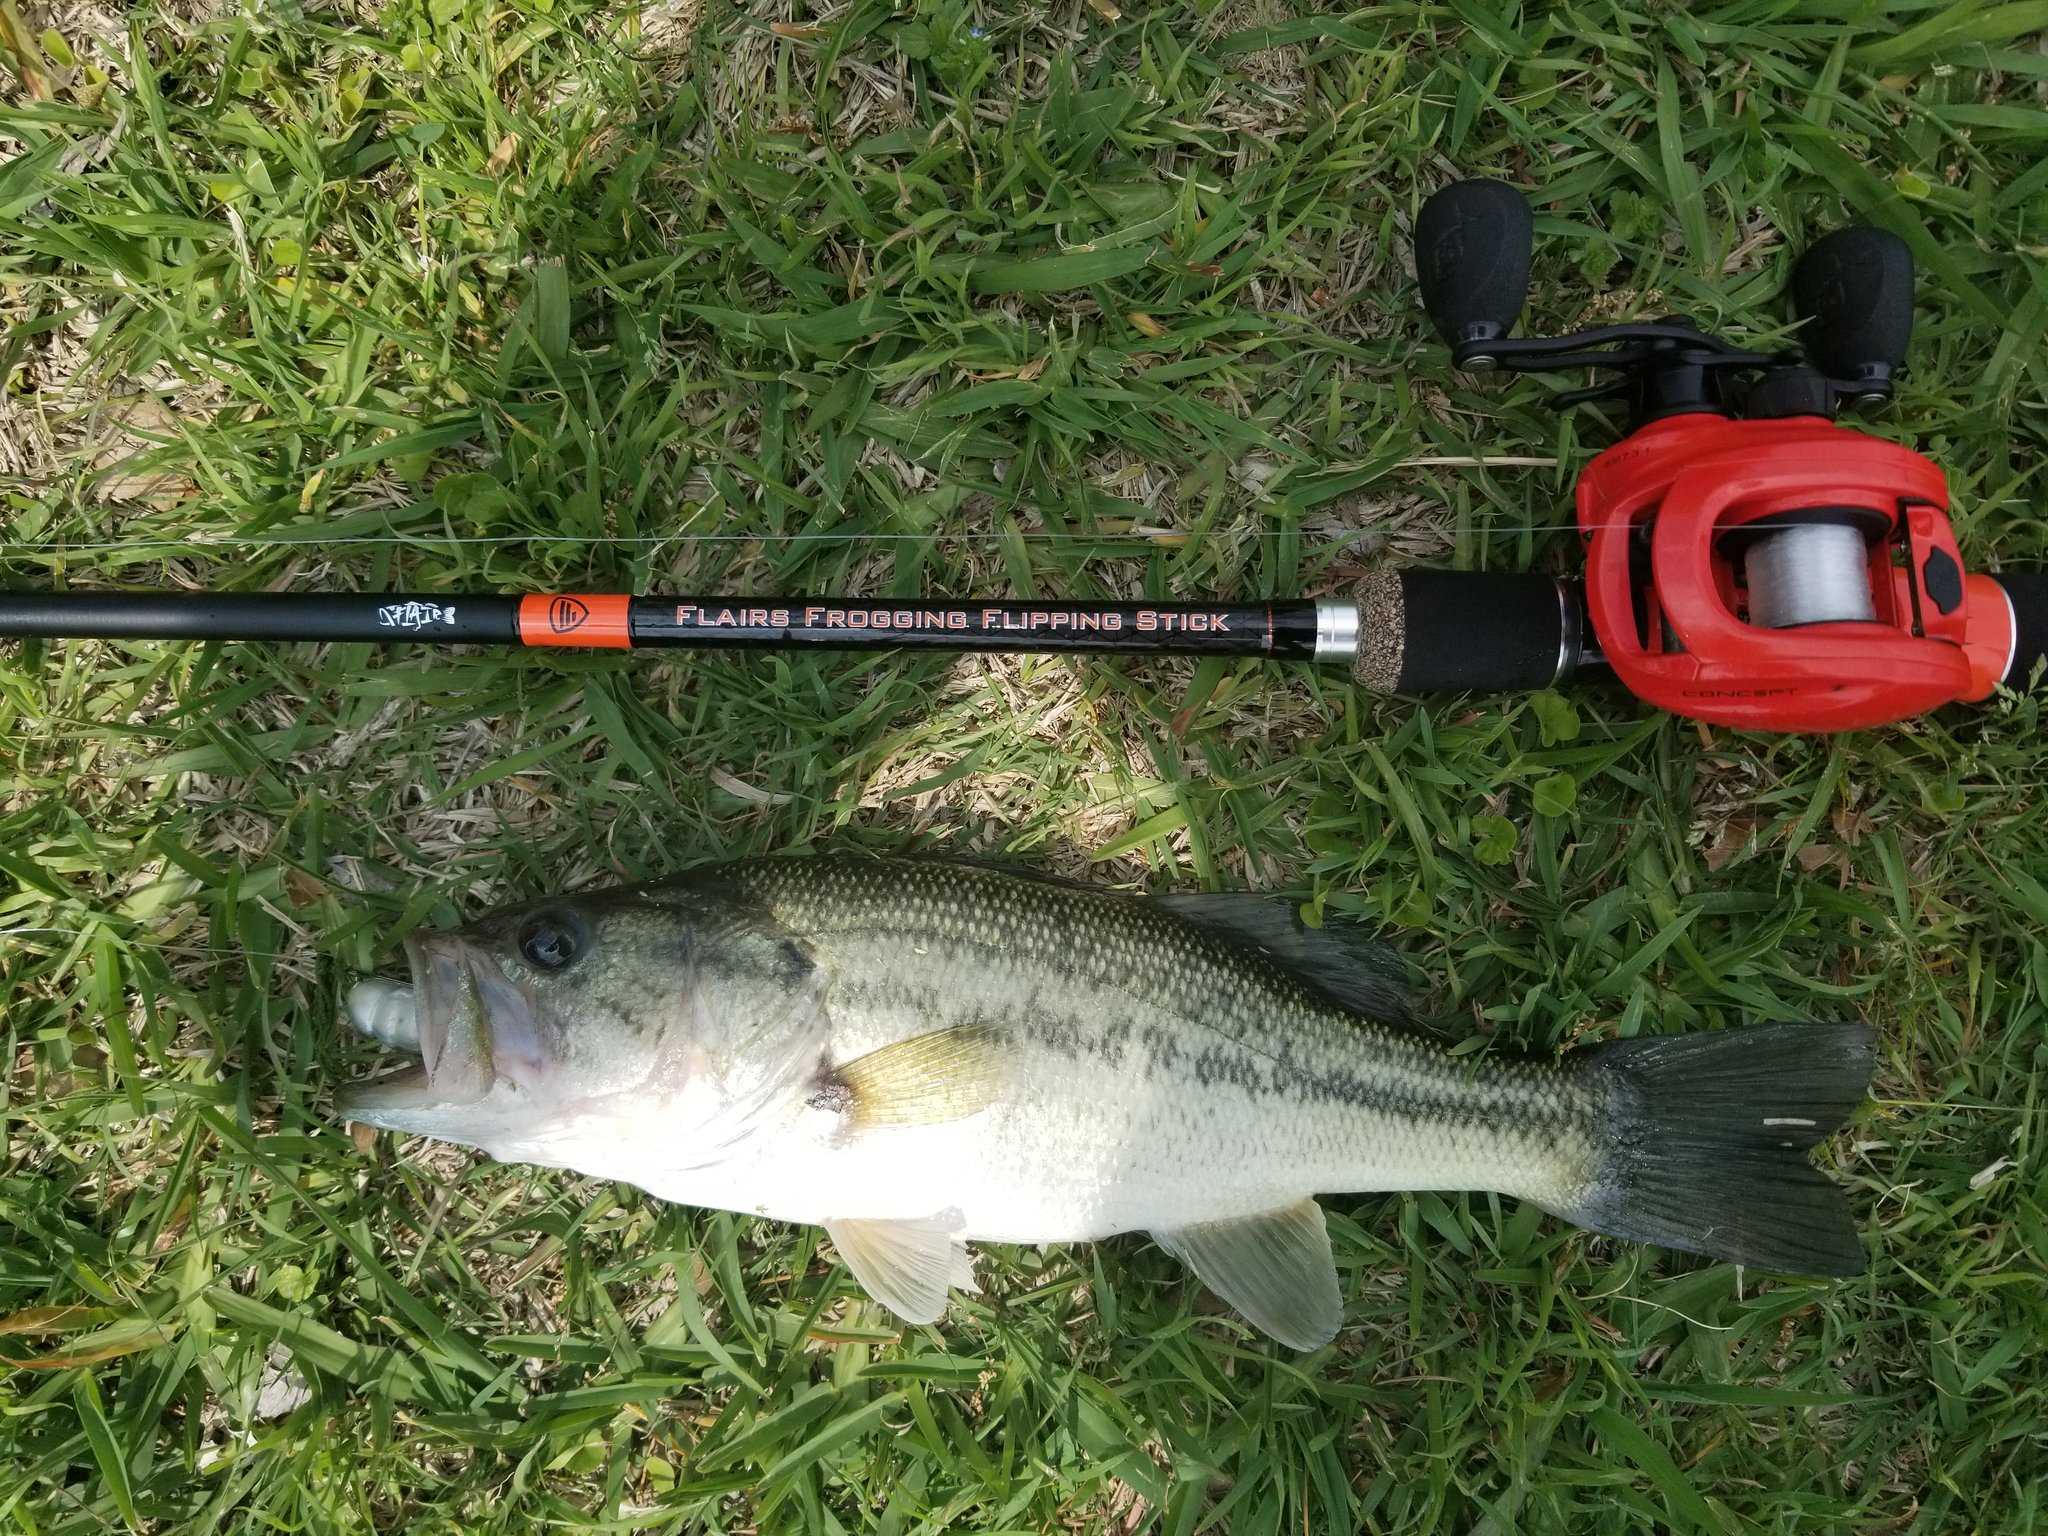 Jonathon Skinkle on X: First #bass with the #new flairs frogging